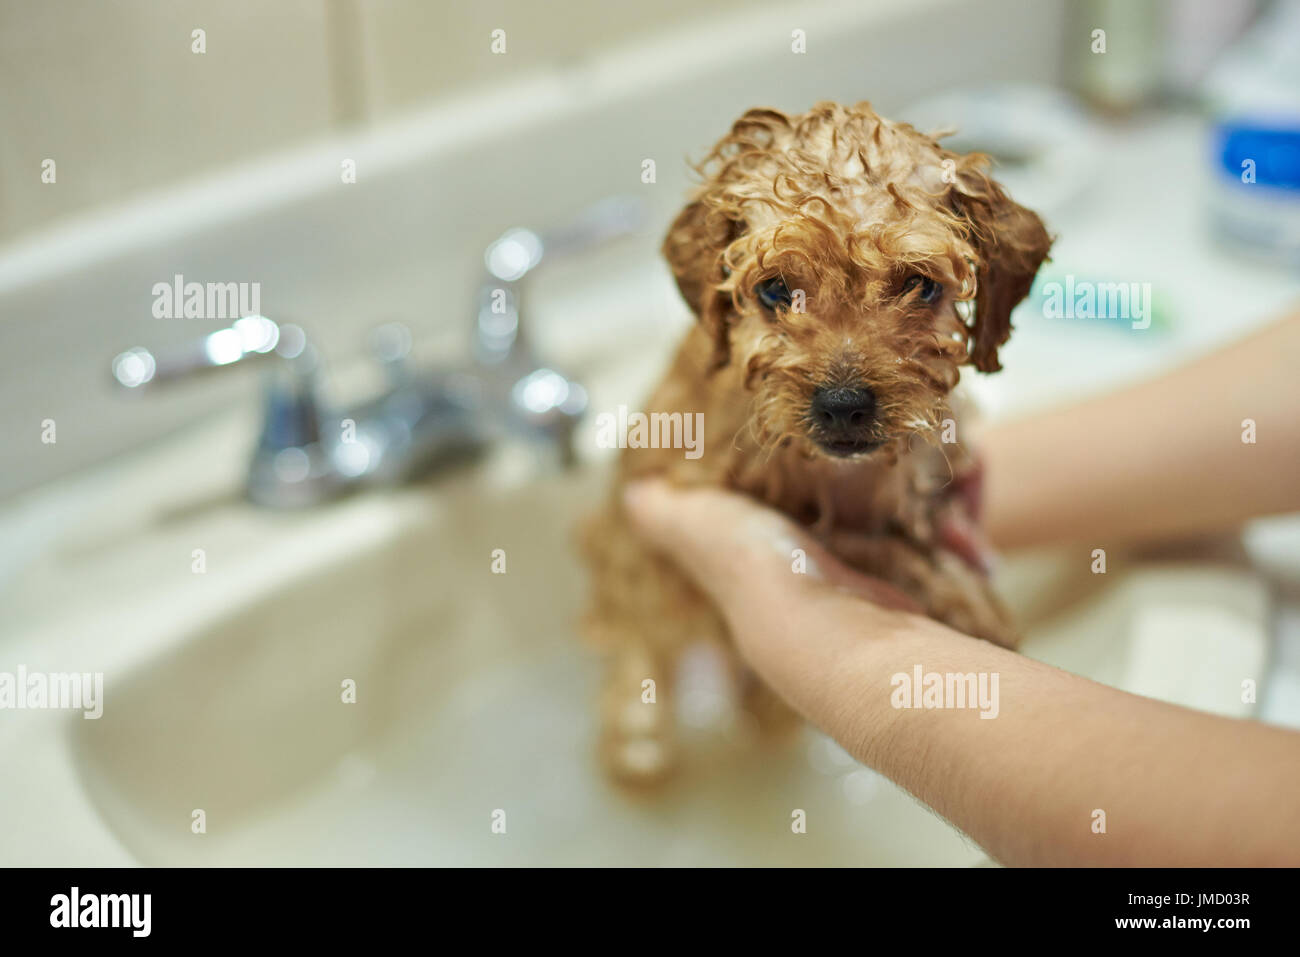 Washing dog salon. Brown poodle puppy in grooming salon Stock Photo